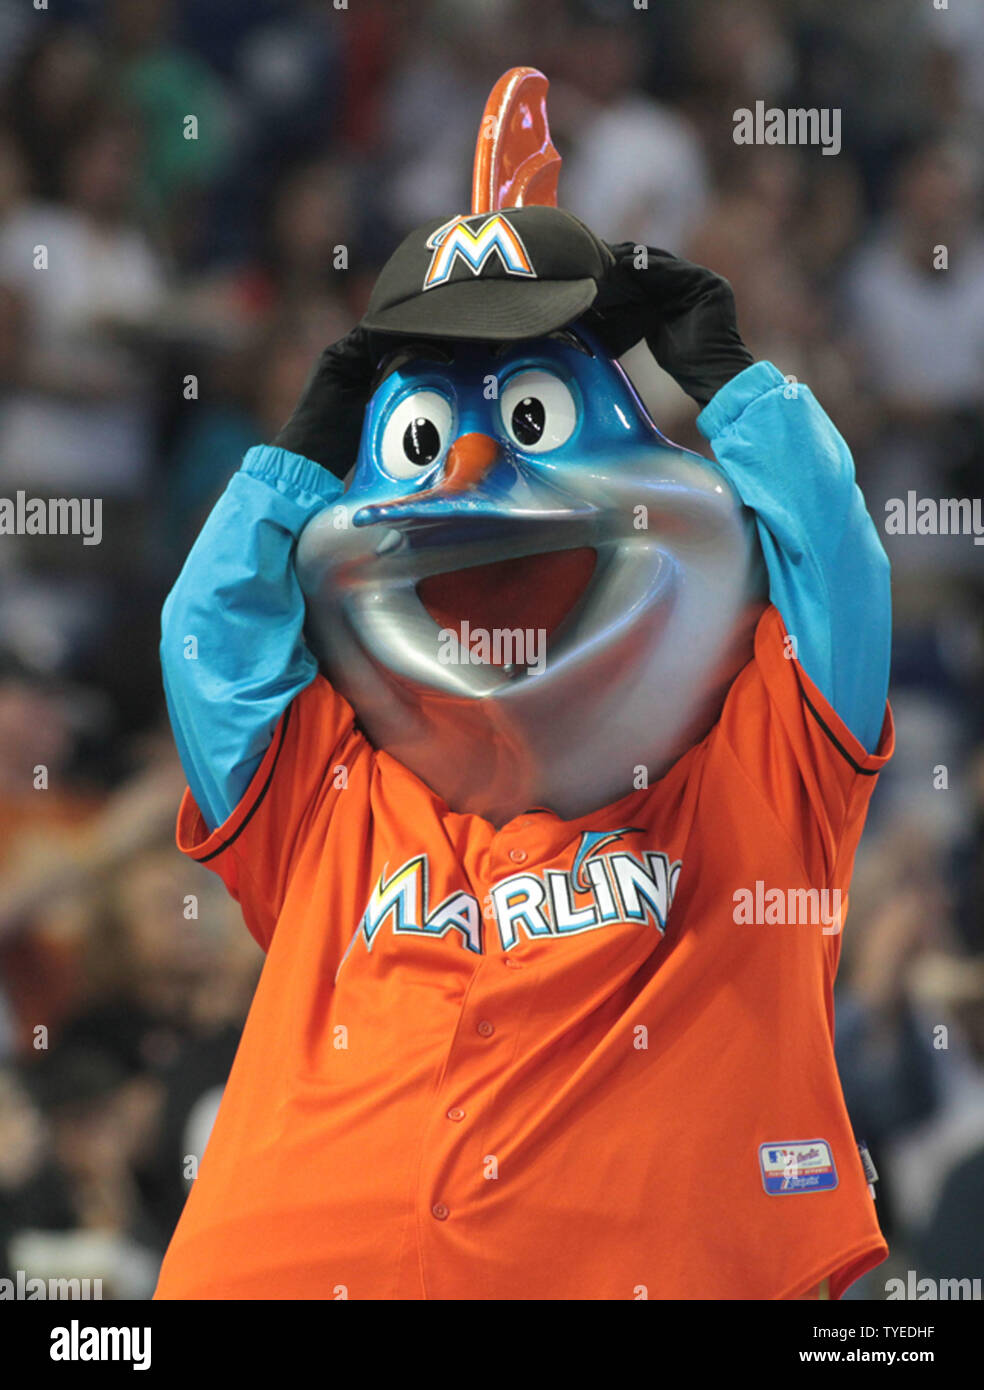 Miami Marlins Mascot Billy the Marlin celebrates on the dugout